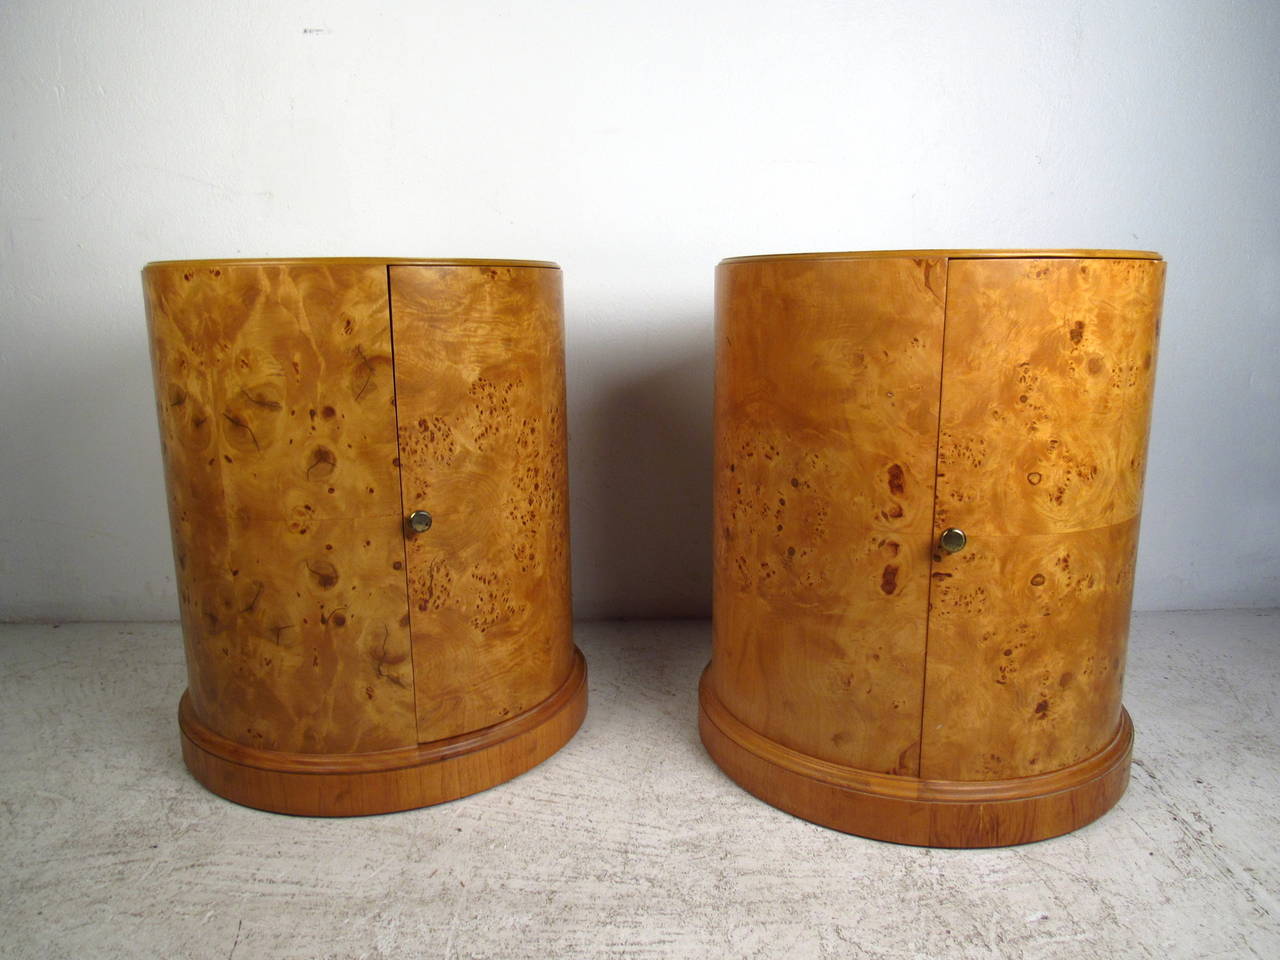 This pair of mid century end tables feature a beautiful burlwood finish, large cabinets with a shelf, brass pulls and a unique round design which offers a bold modern accent and ample storage space to any home or office space.

Please confirm item